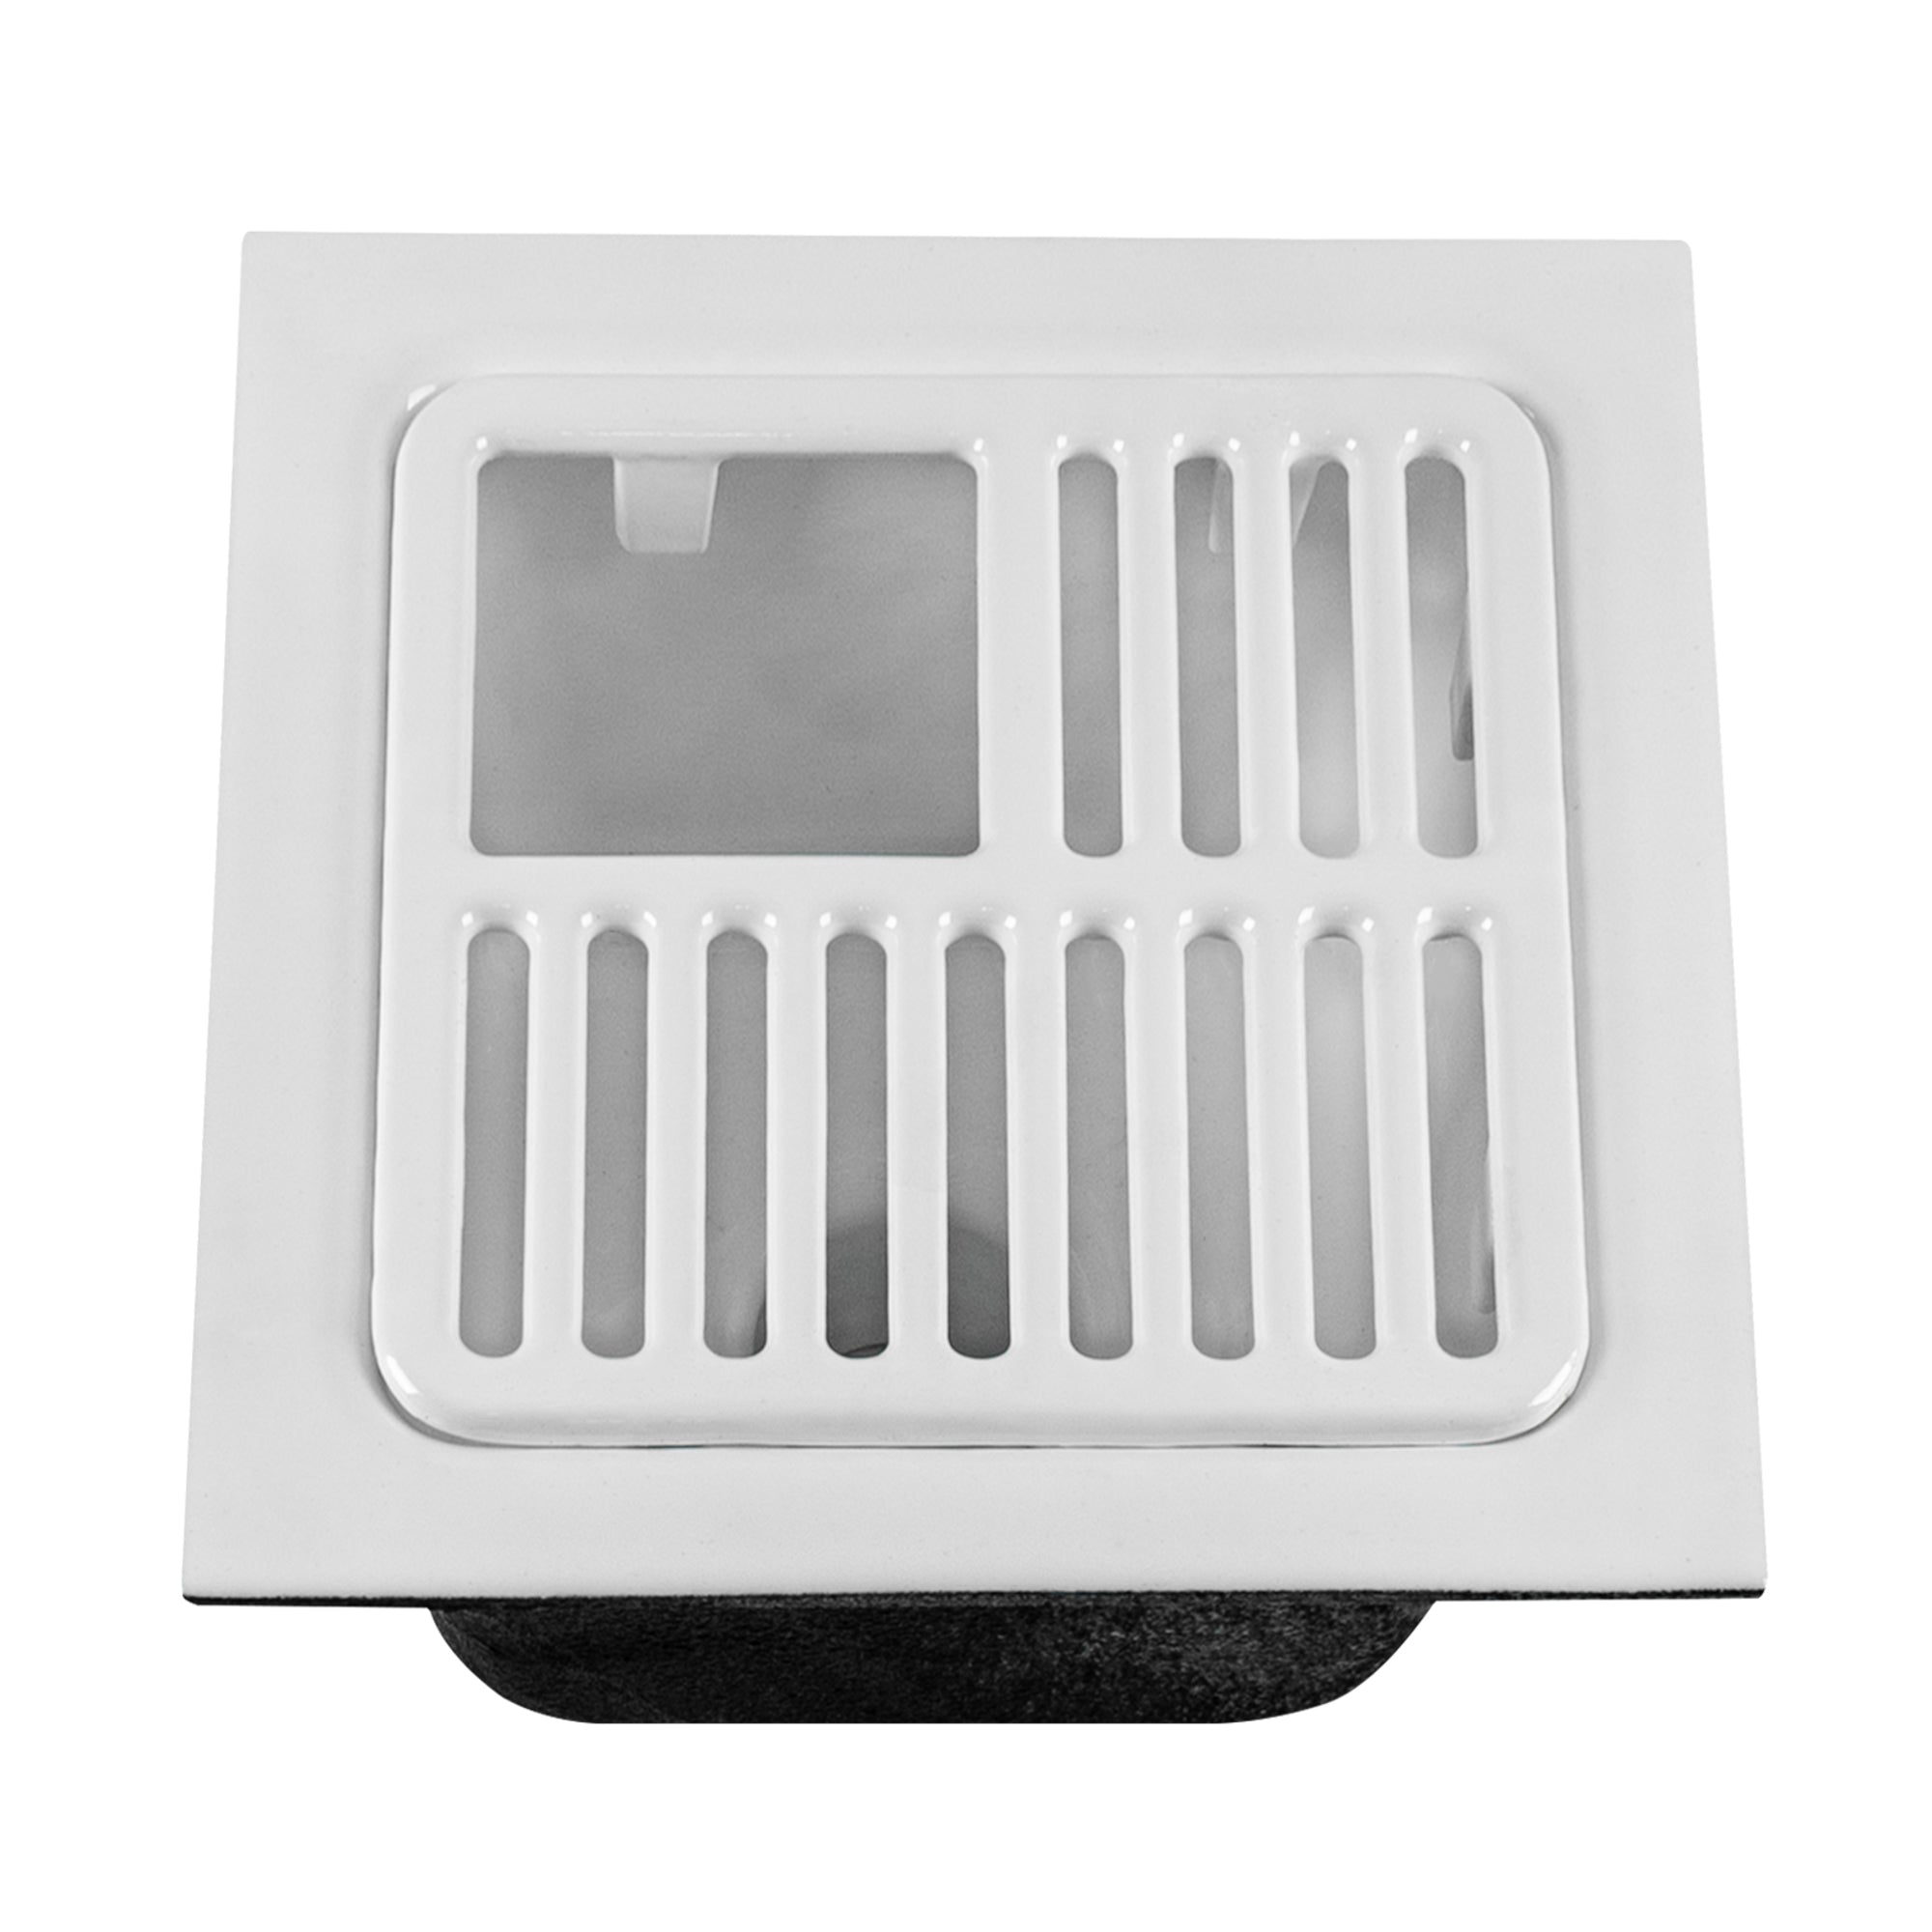 Leyso FS-T3/4 Cast Iron Porcelain Floor Sink Top Grate with Ceramic Surface, 9-⅜” x 9-⅜” x 1-¼” - Perfect for Restaurant, Bar, Buffet (¾ Size)